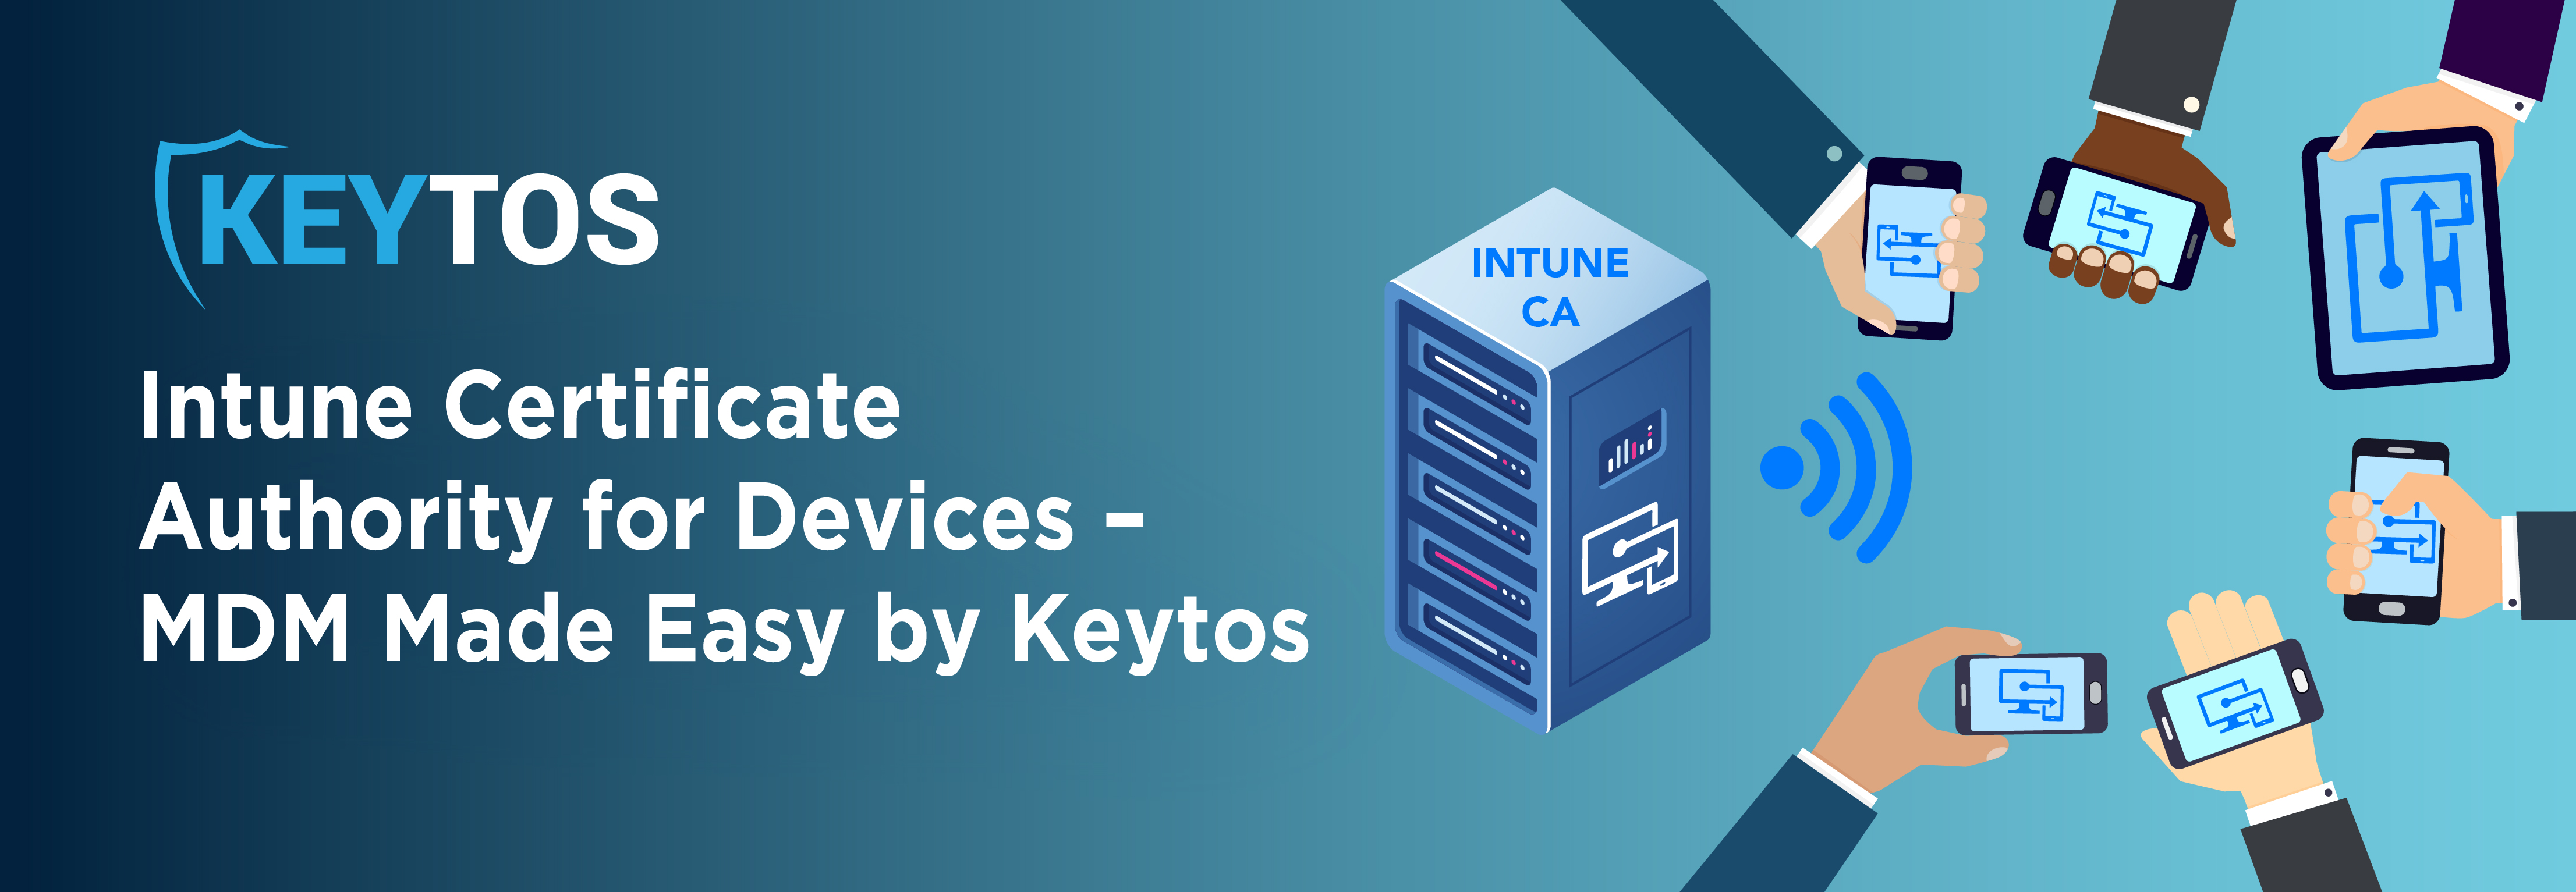 Intune CA for Devices - MDM Made Easy by Keytos